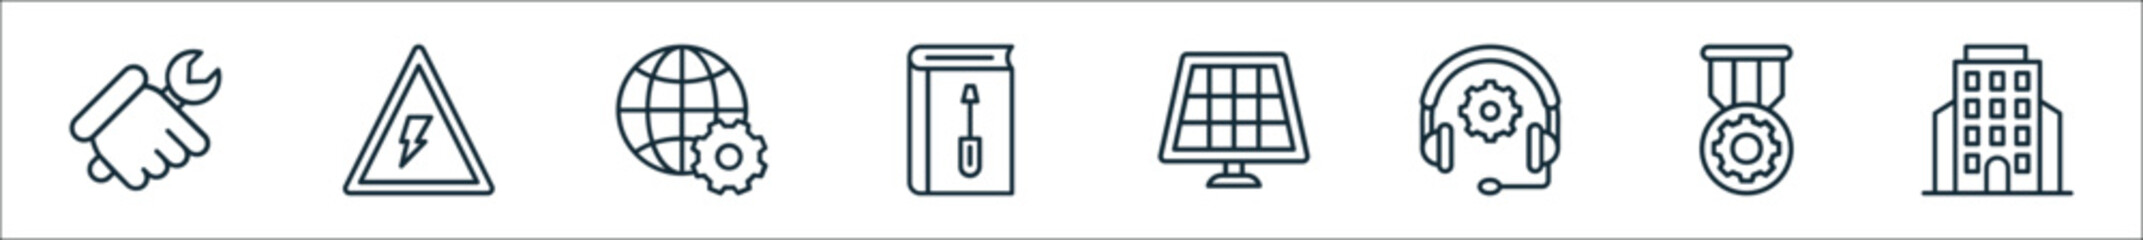 outline set of engineering elements line icons. linear vector icons such as technical support, voltage, solution, manual book, solar plane, technical support, cog, skyscraper